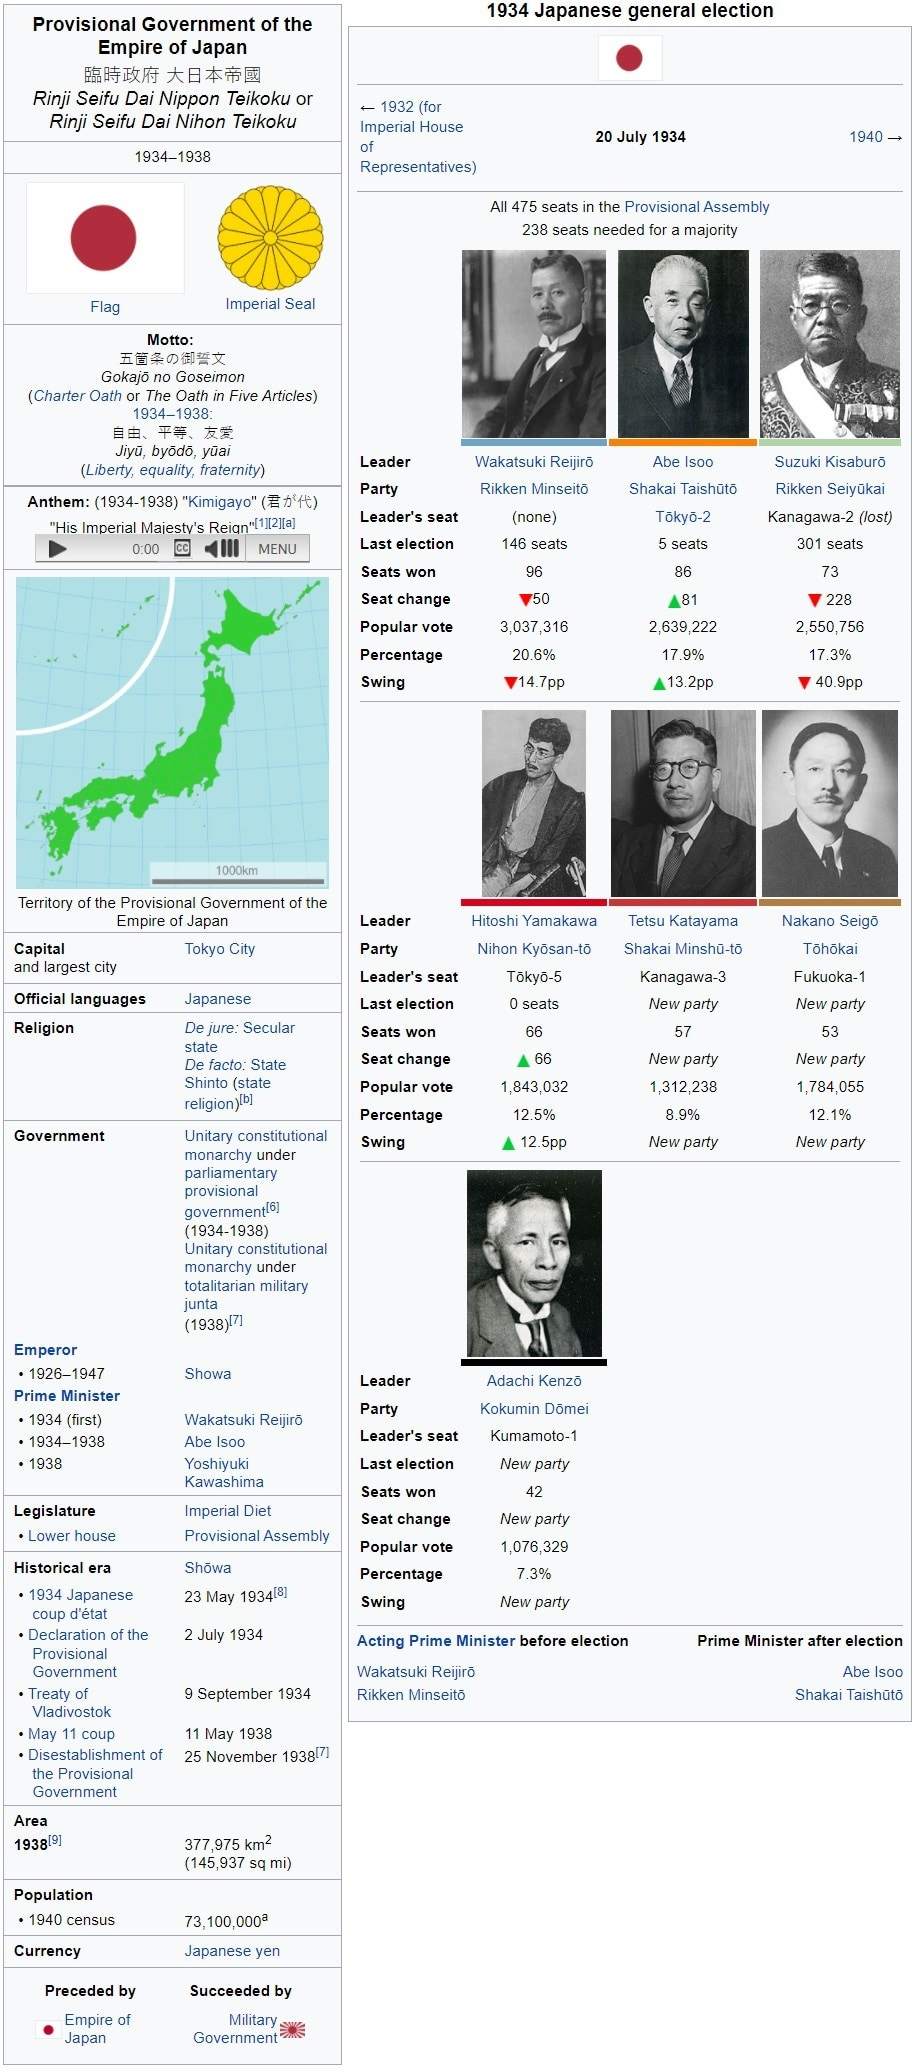 japanese provisional government and election ib.jpg